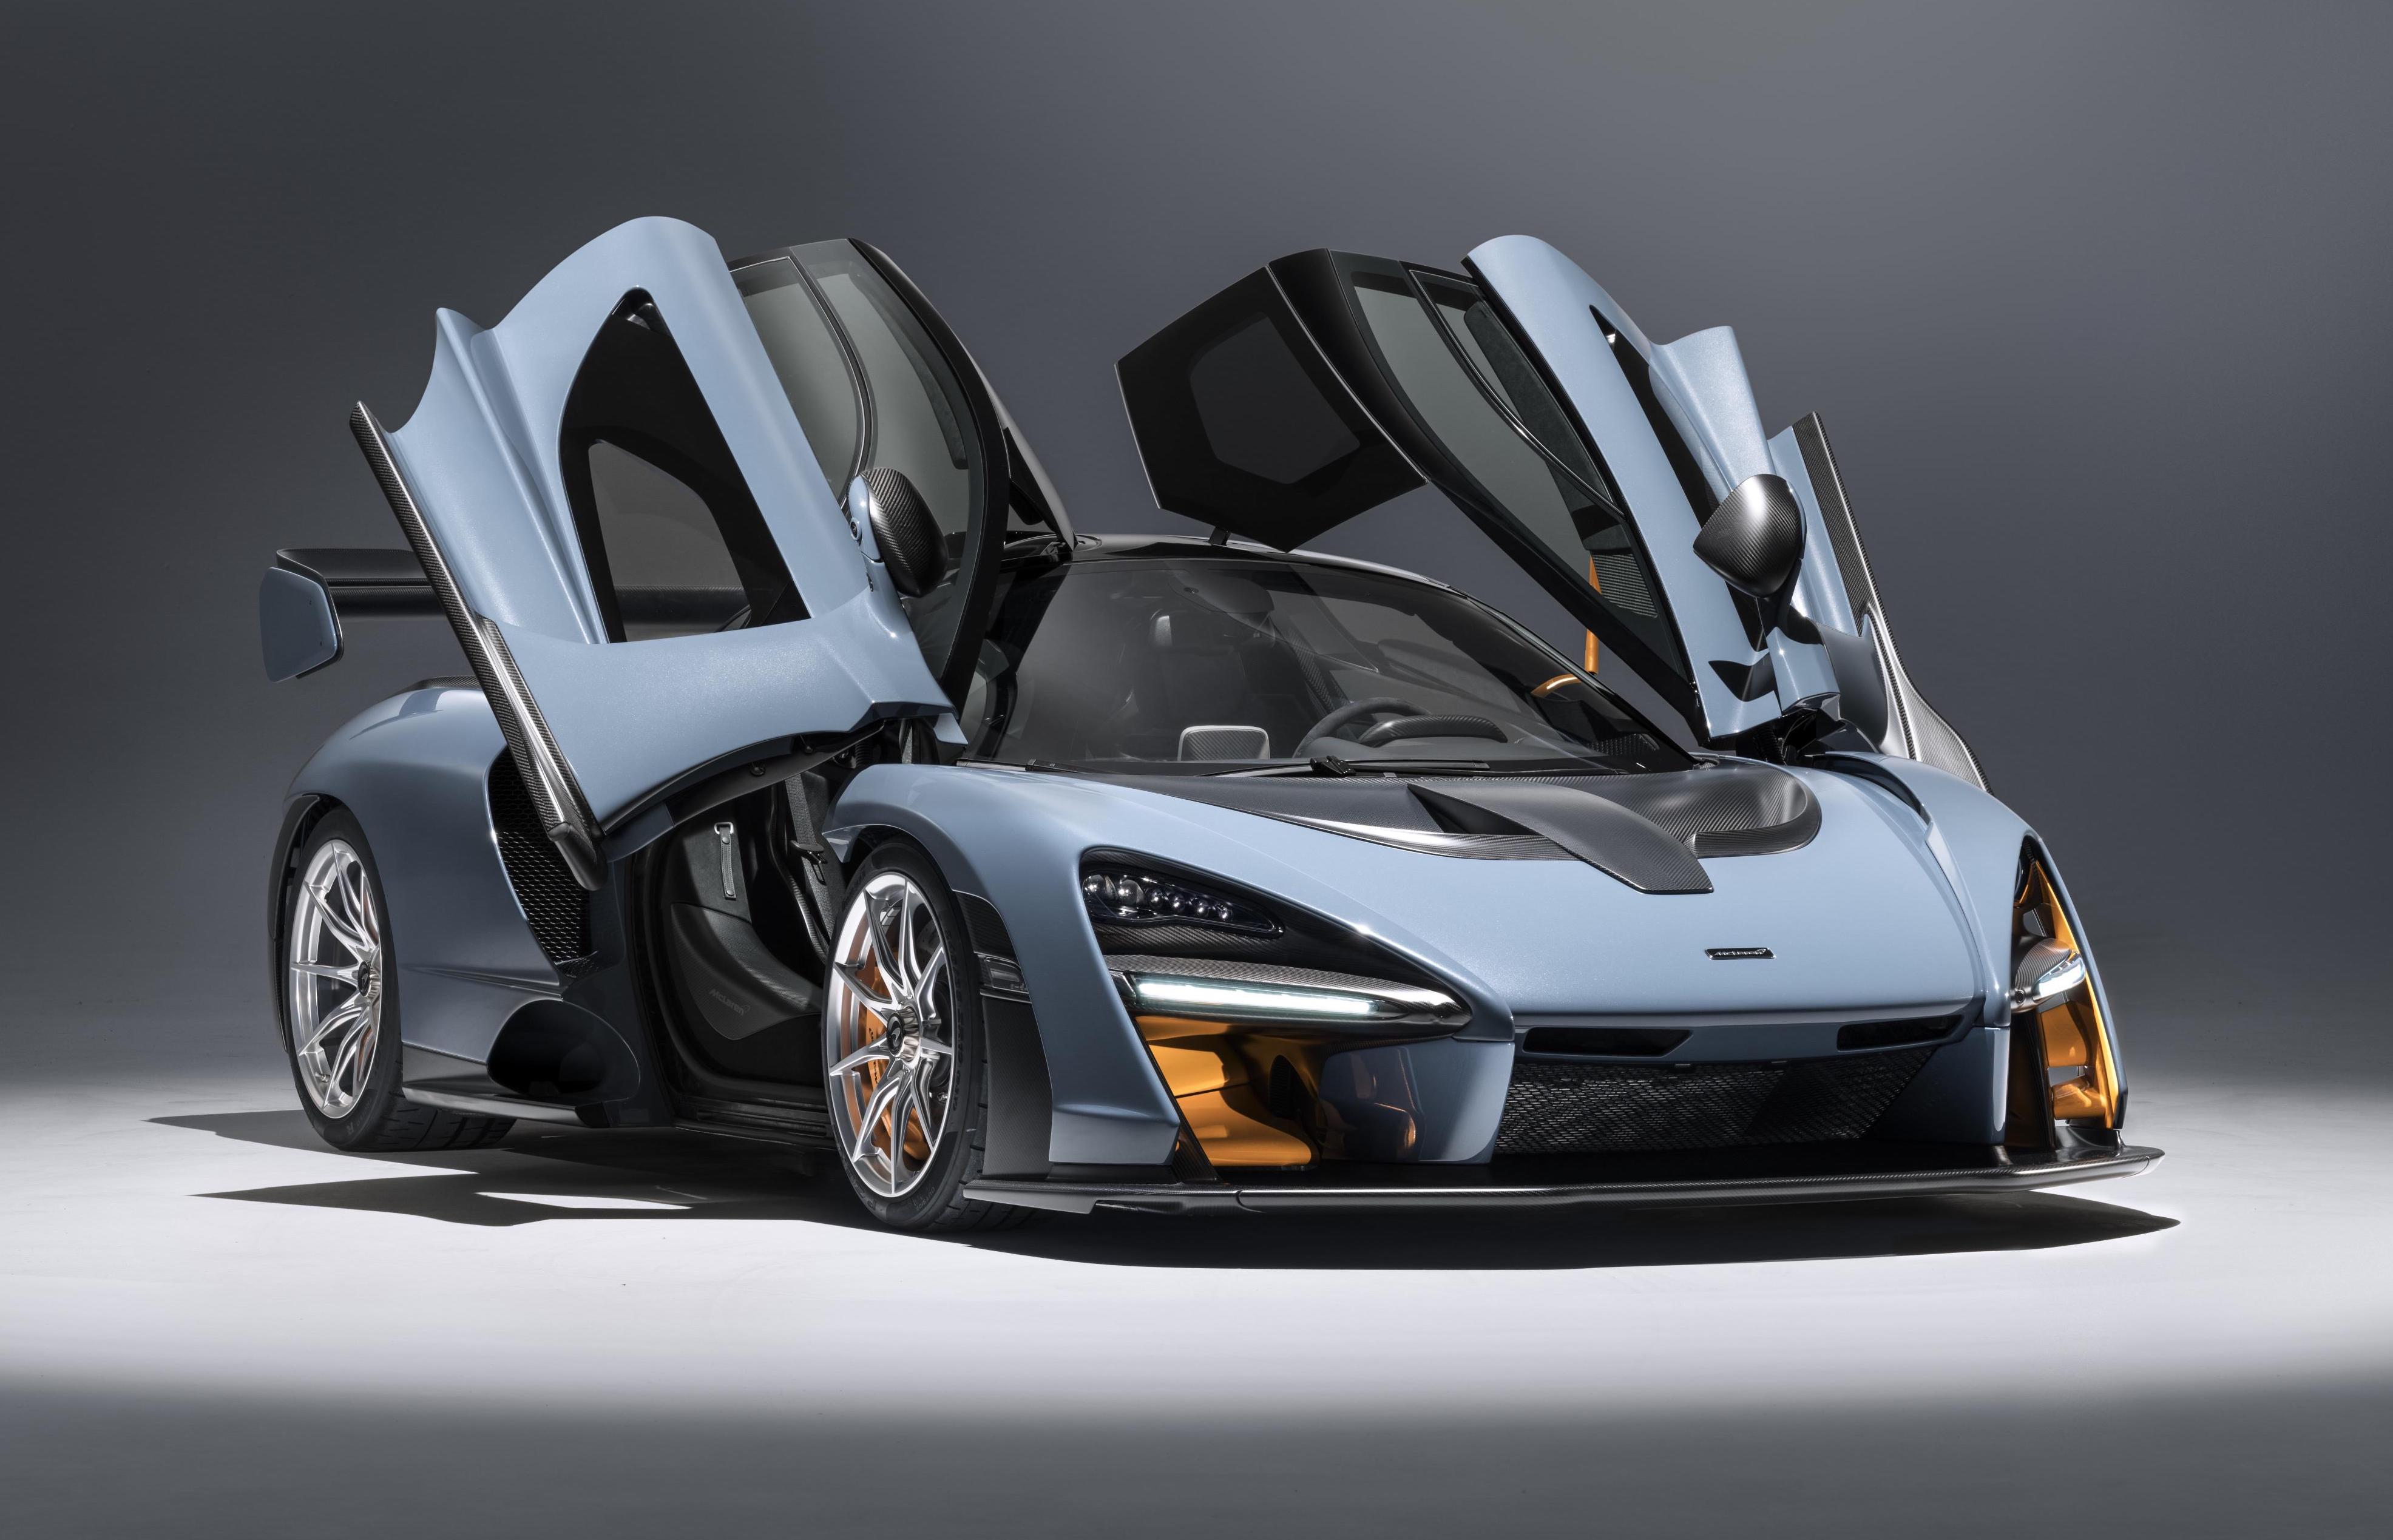 McLaren Senna: Specifications, Pros and Cons, FAQ, and More